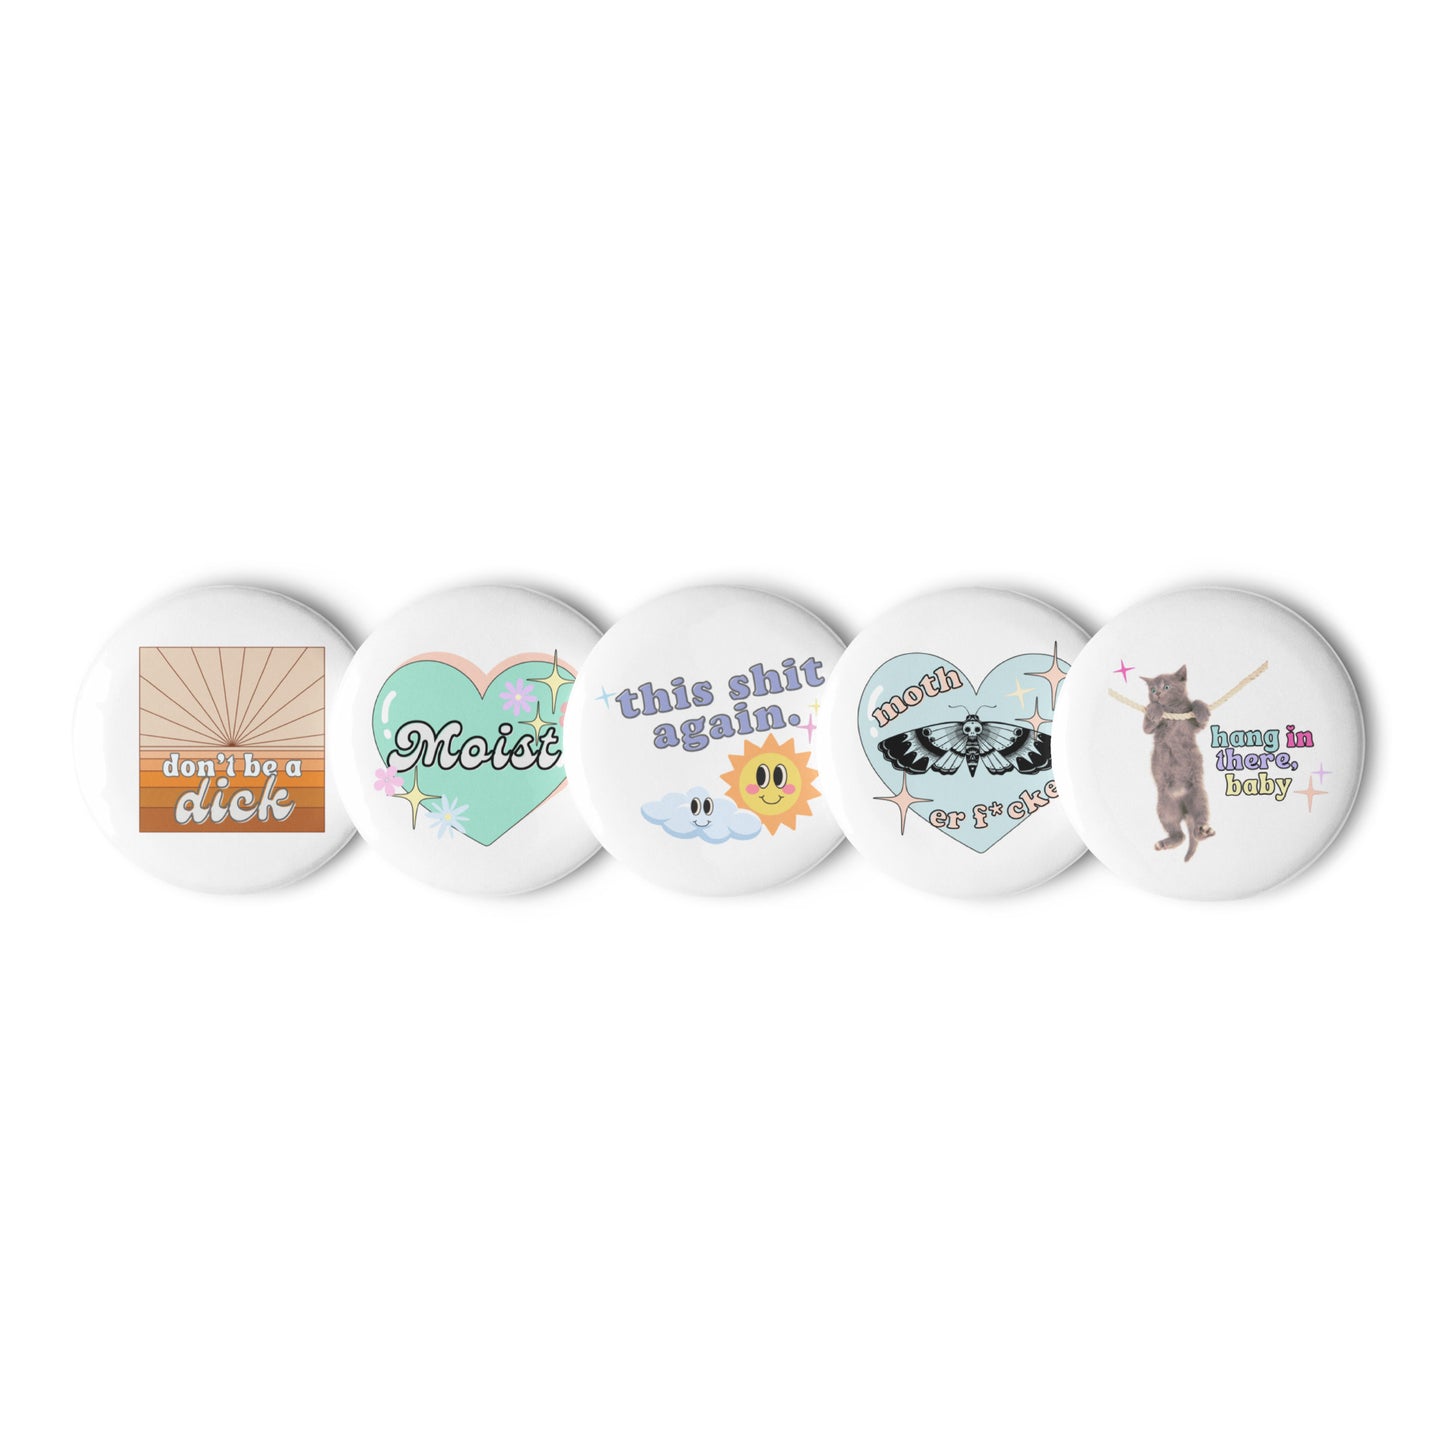 Set of fresh and funny pin buttons